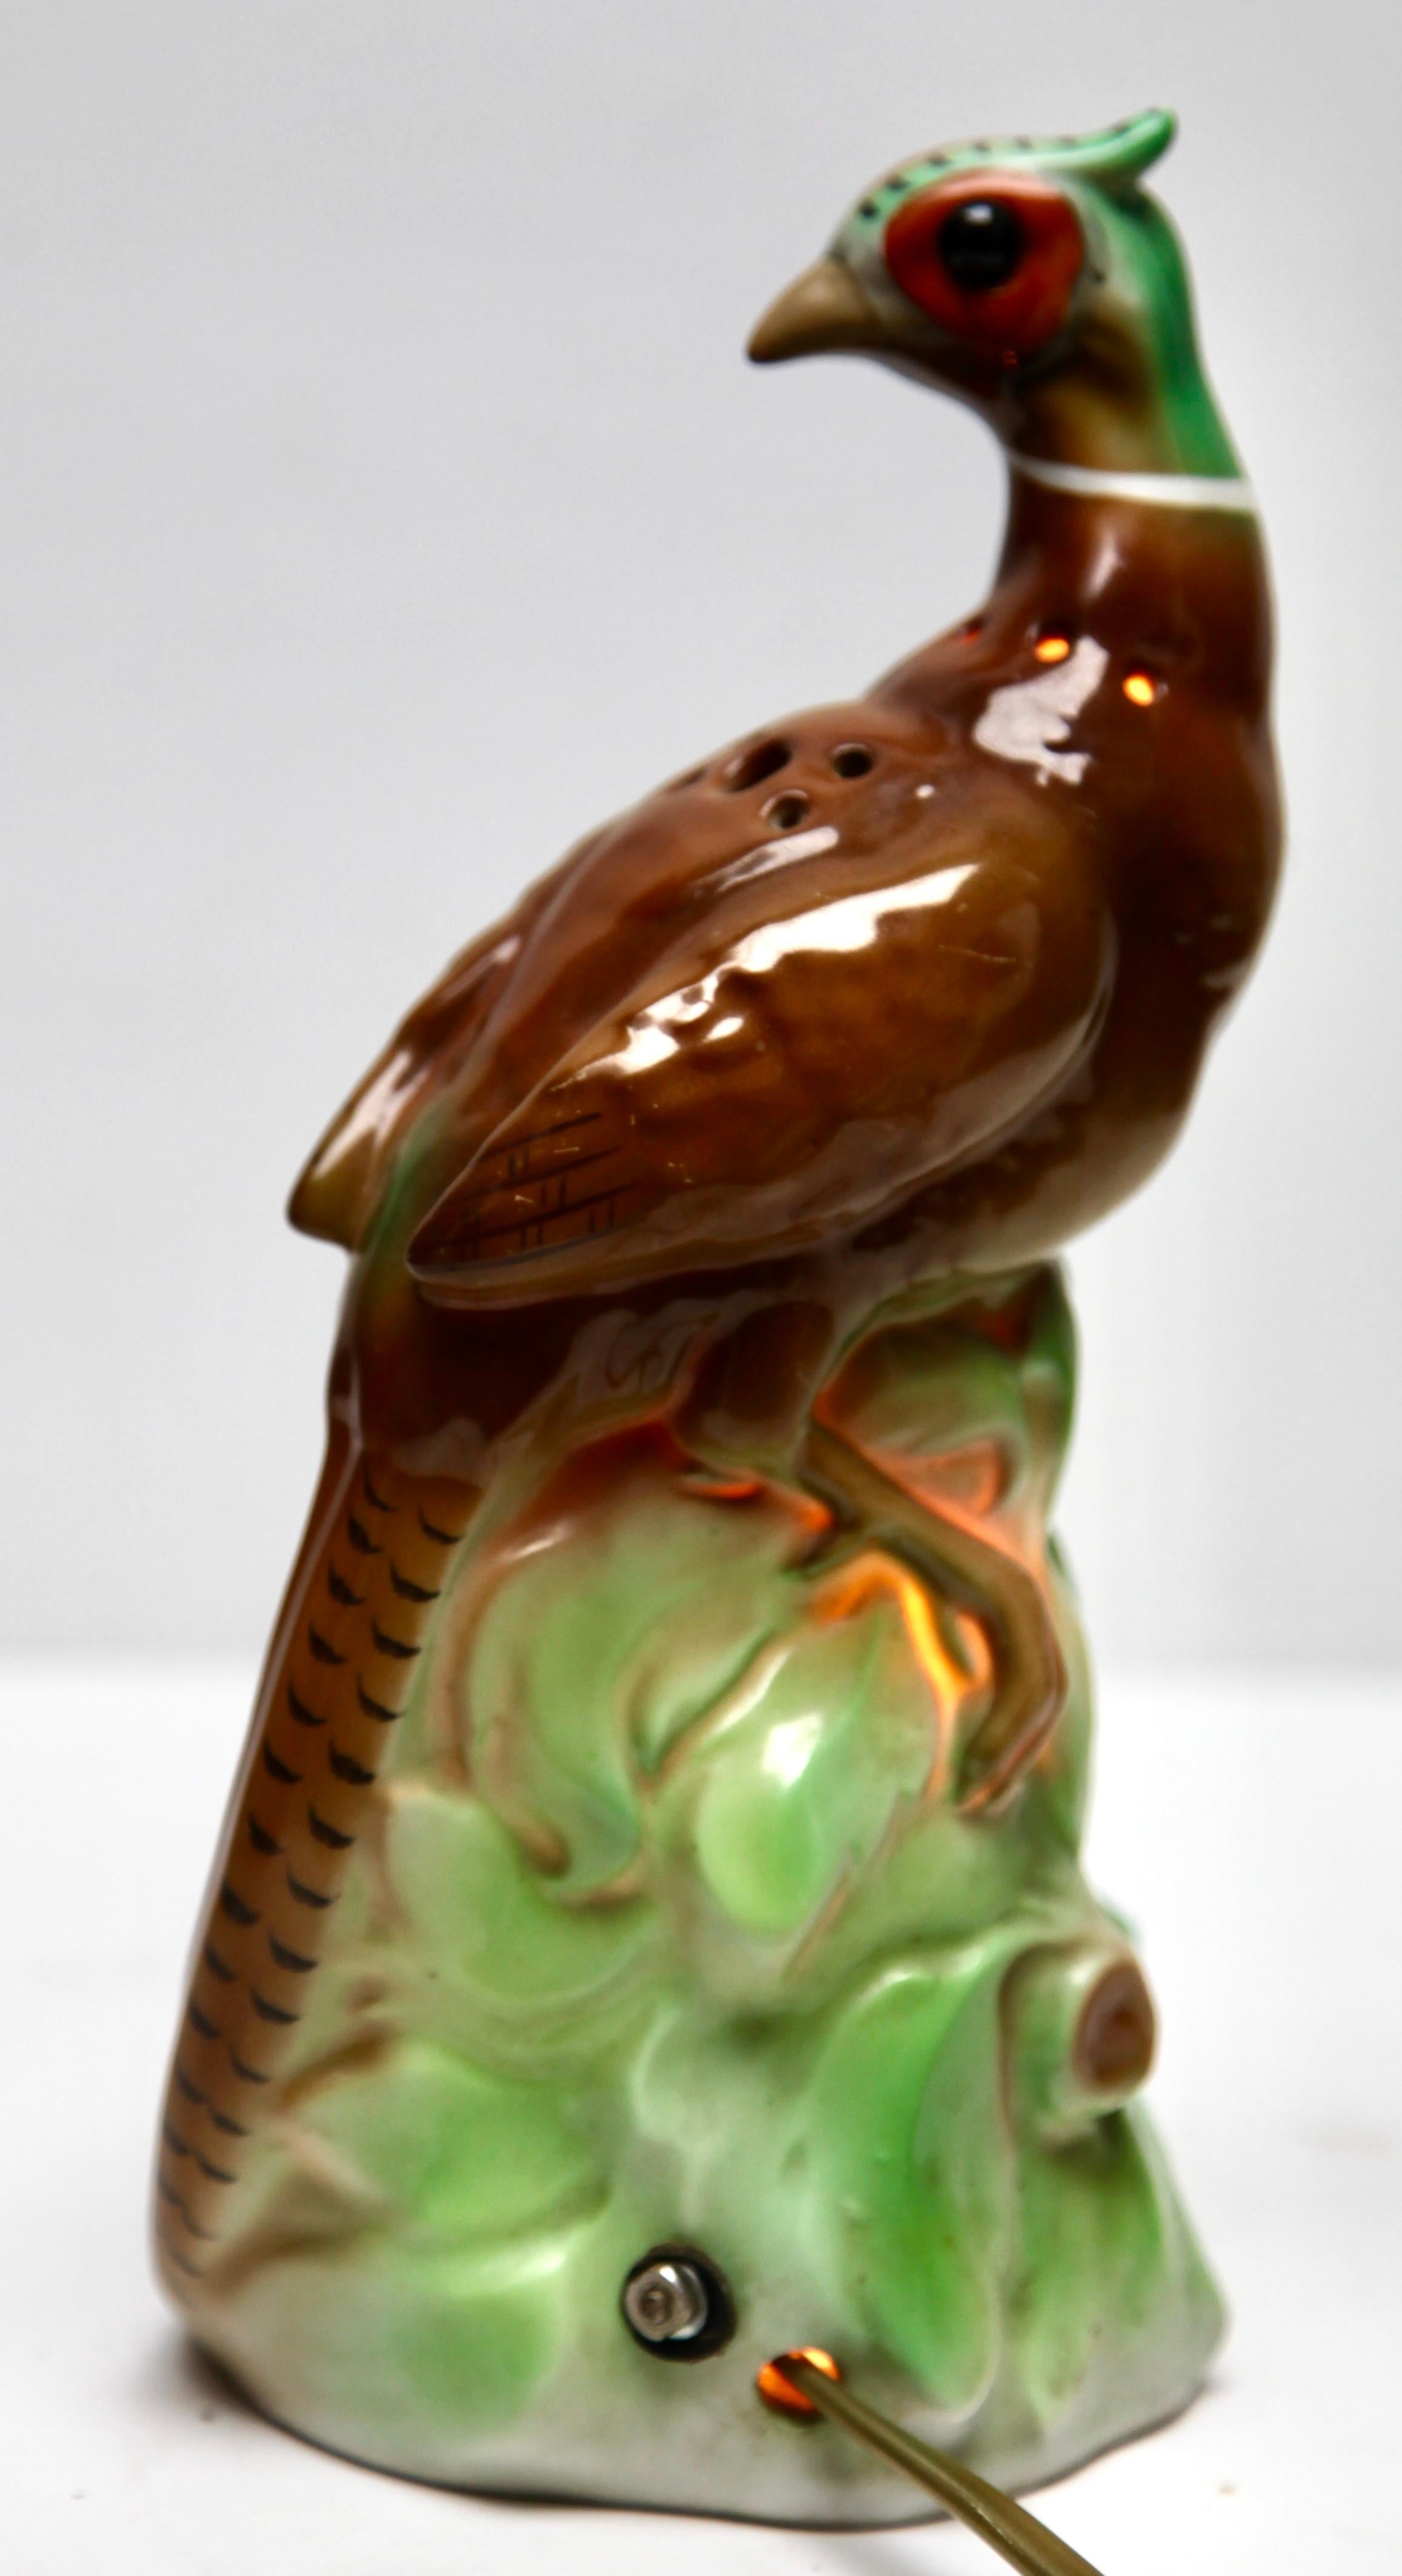 Perfume lamp in the form of a Bird attributed to Carl Scheidig Grafenthal, Germany. 
Made from glazed porcelain. 
Electrical parts European standards with an inner light bulb (standard E 14) to give a warm and comforting night light. The light